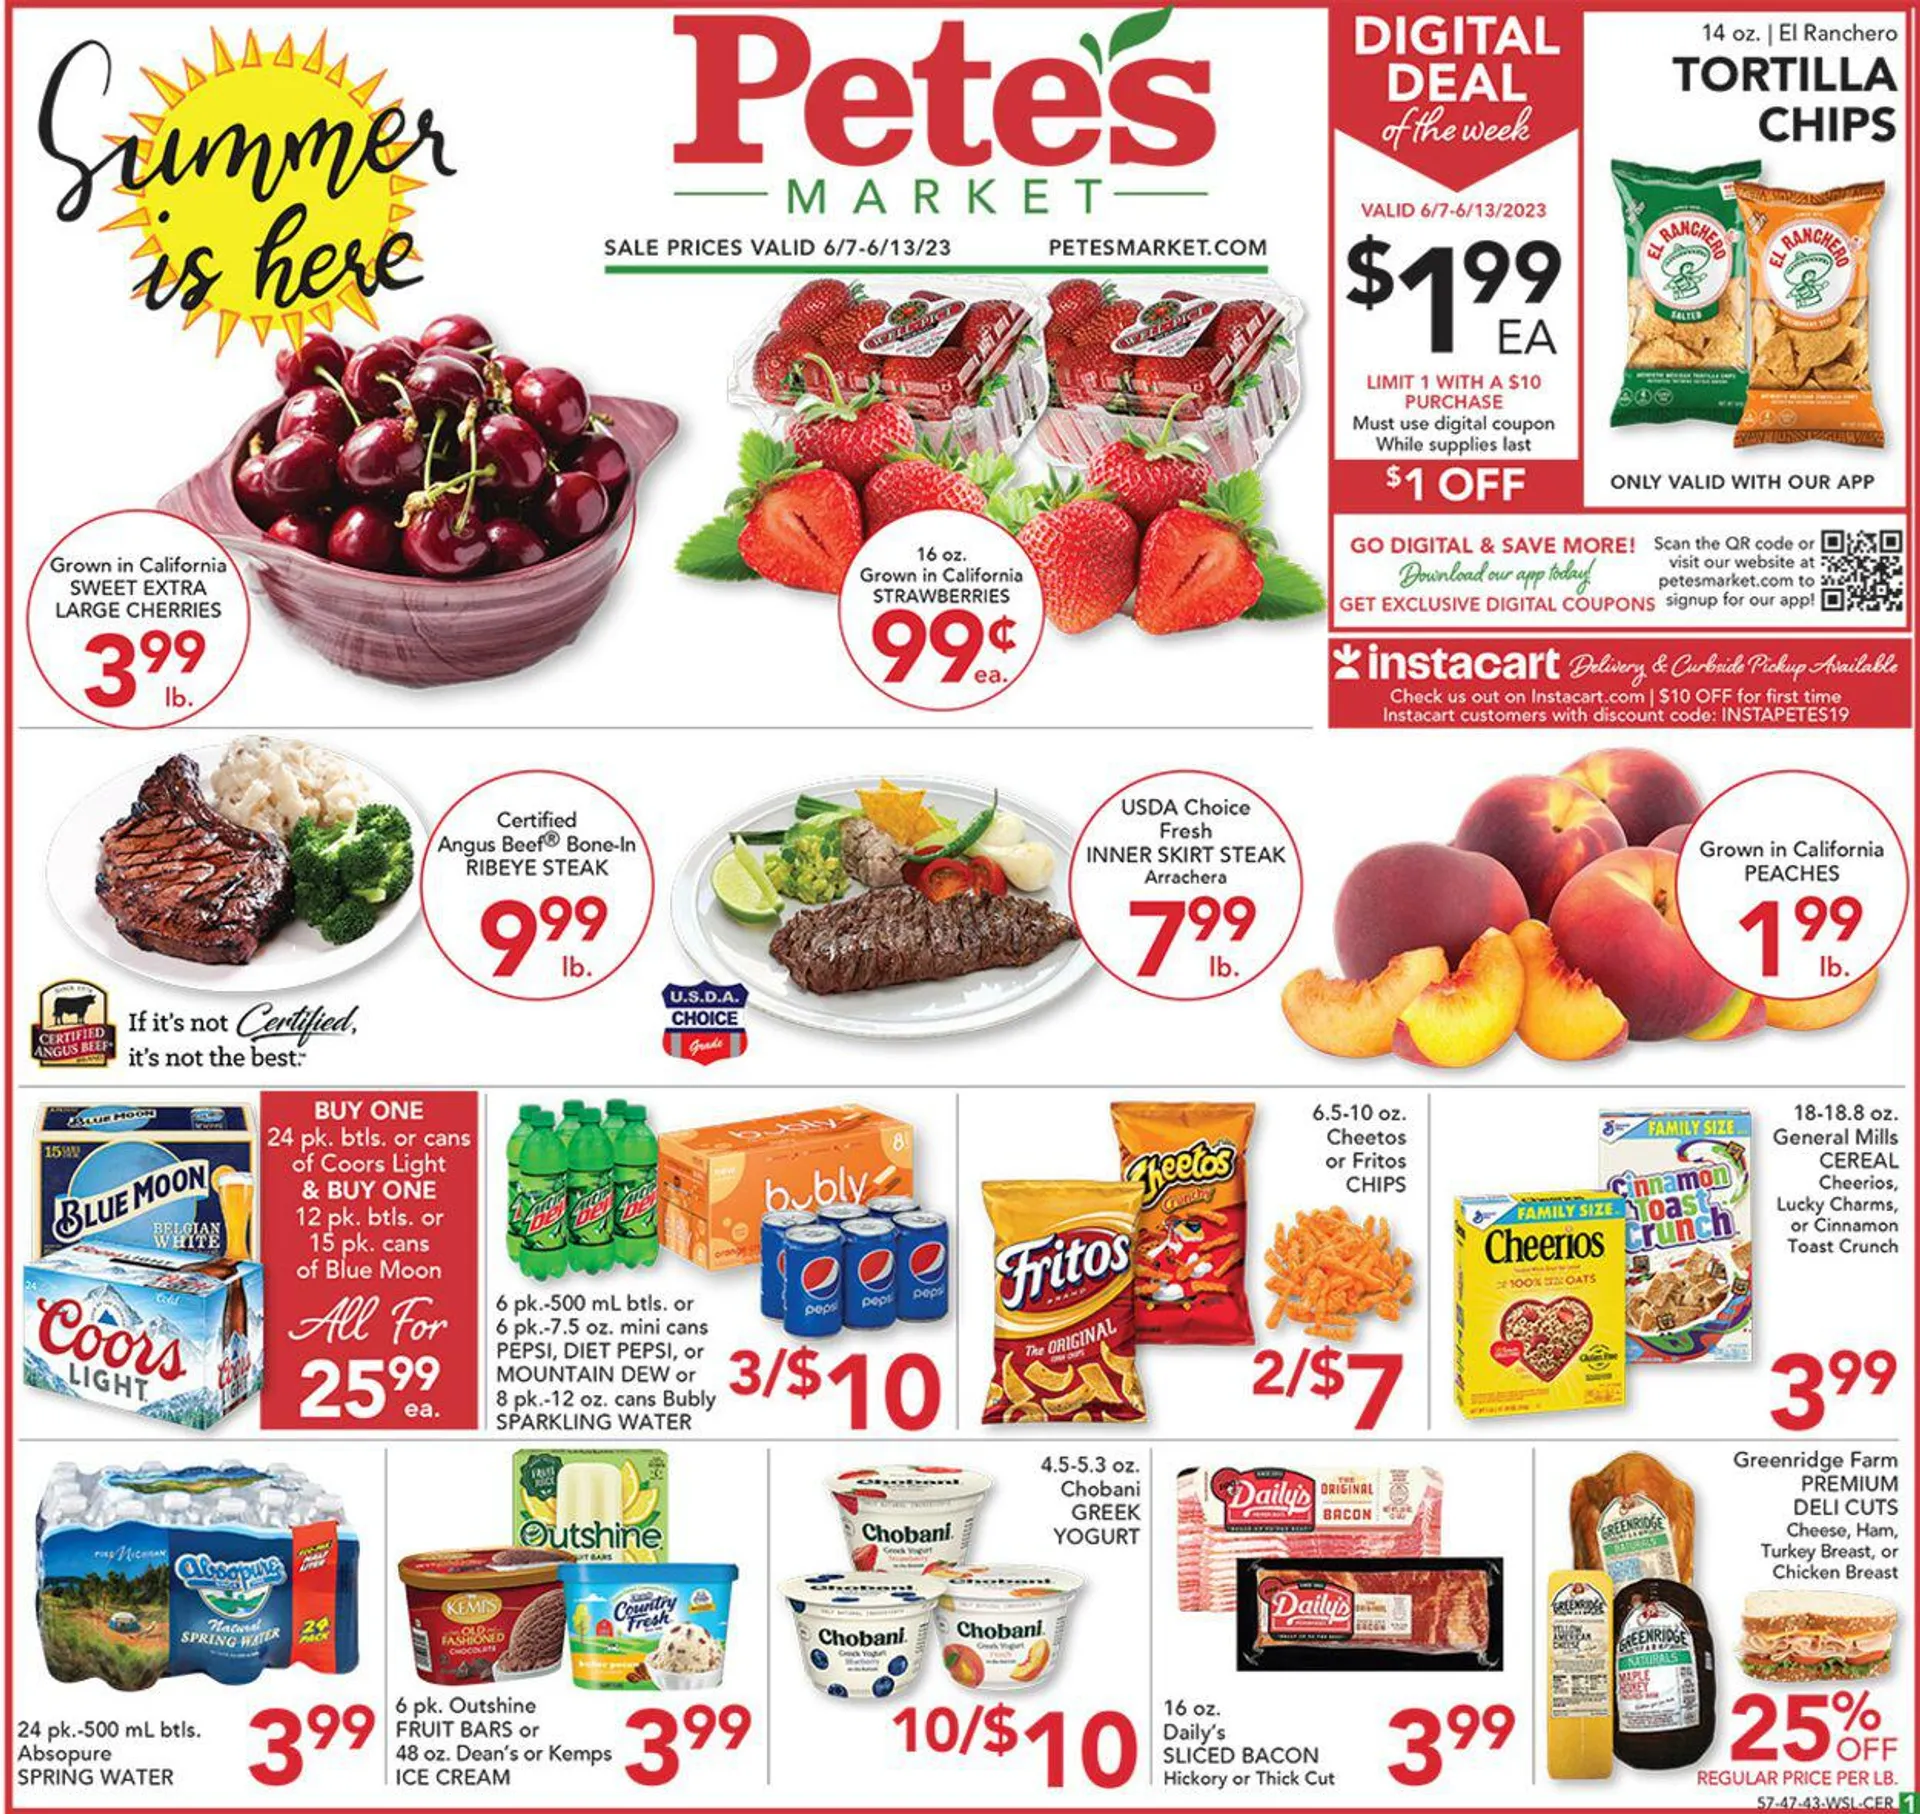 Petes Fresh Market Current weekly ad - 1